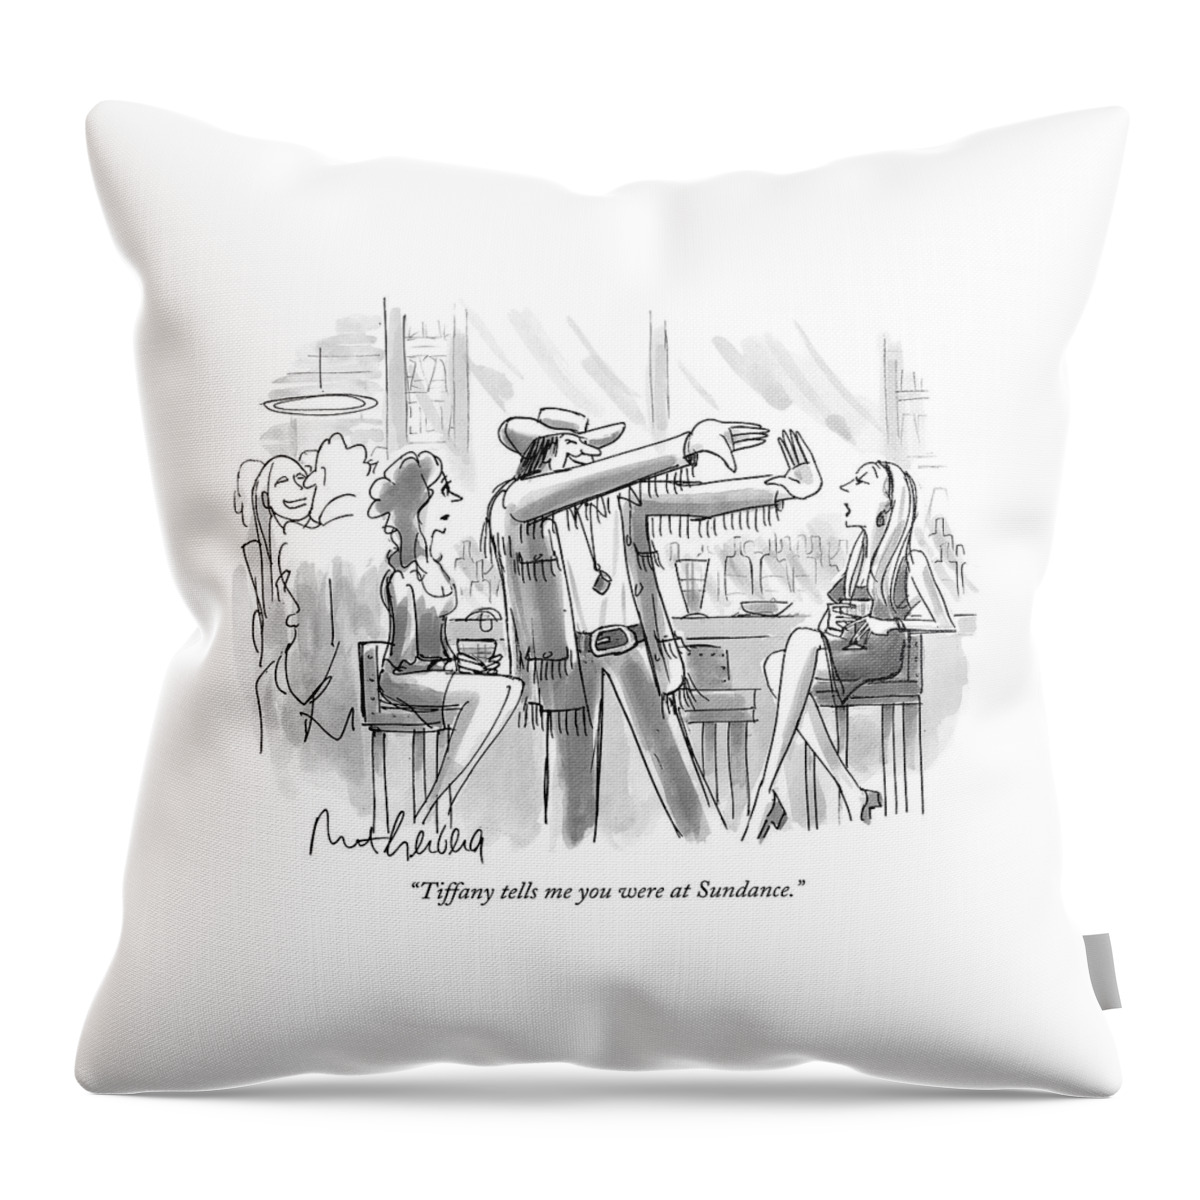 Tiffany Tells Me You Were At Sundance Throw Pillow